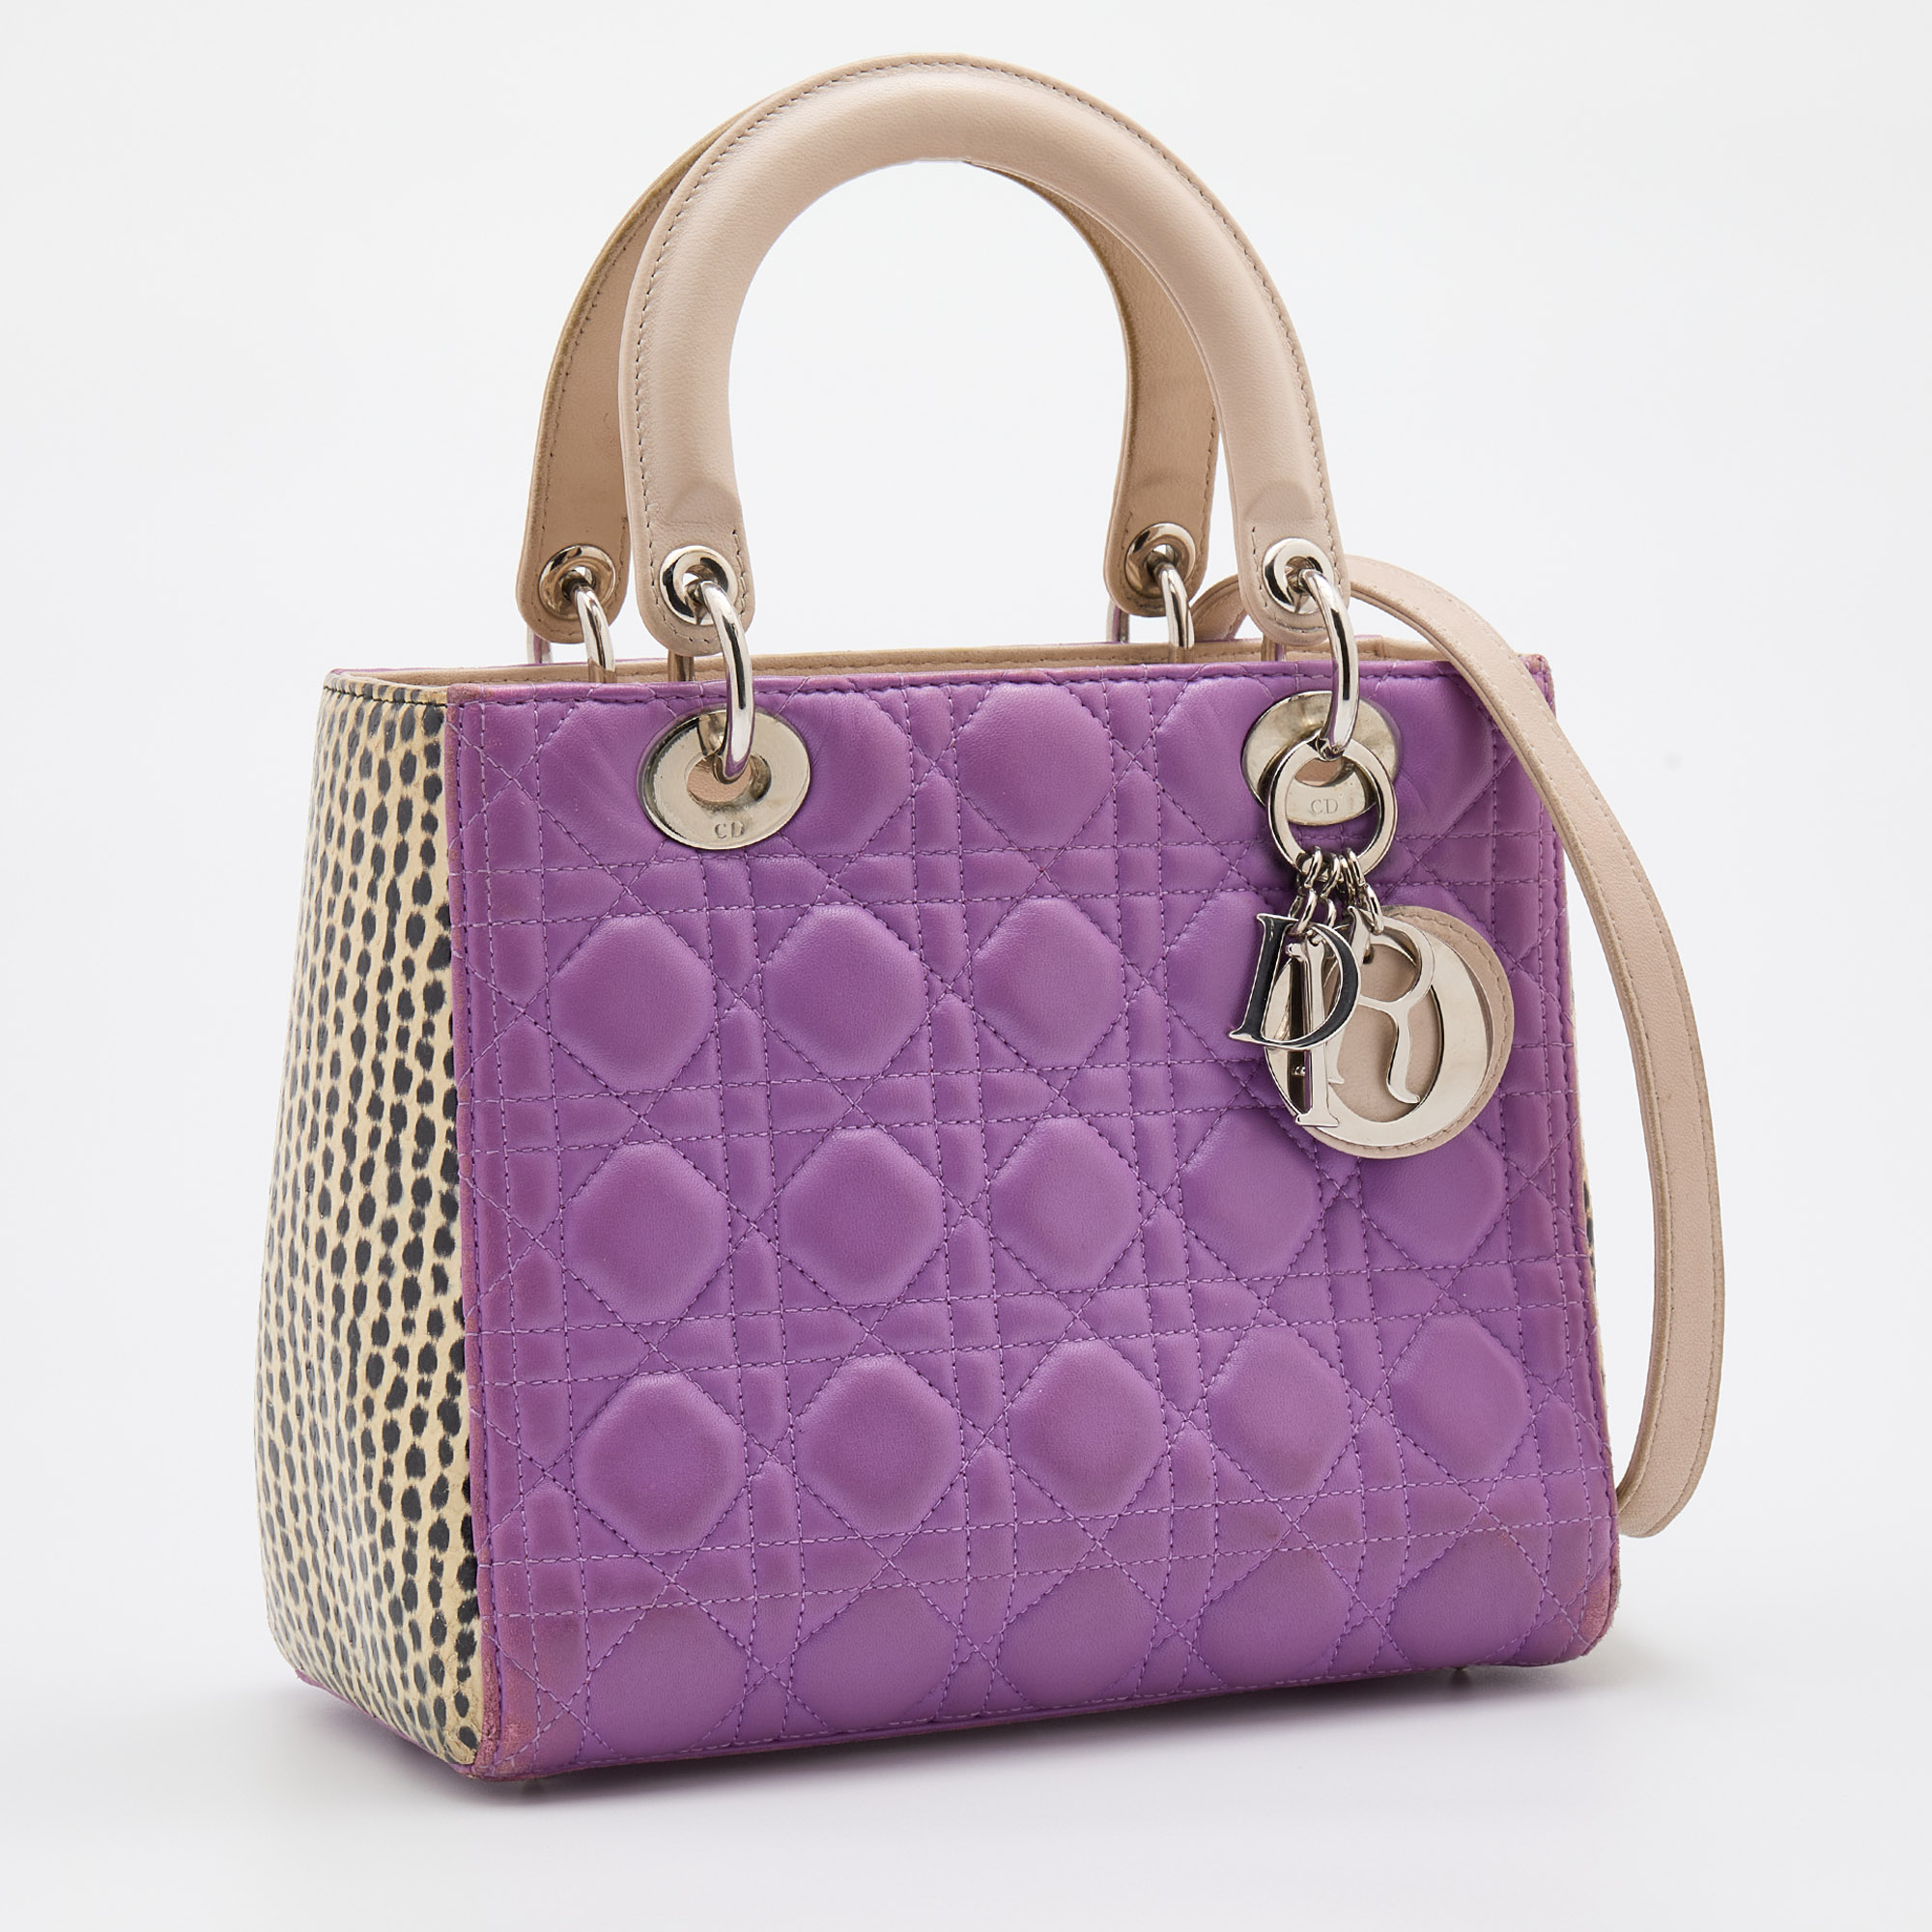 Dior Multicolor Leather And Water Snake Medium Lady Dior Tote